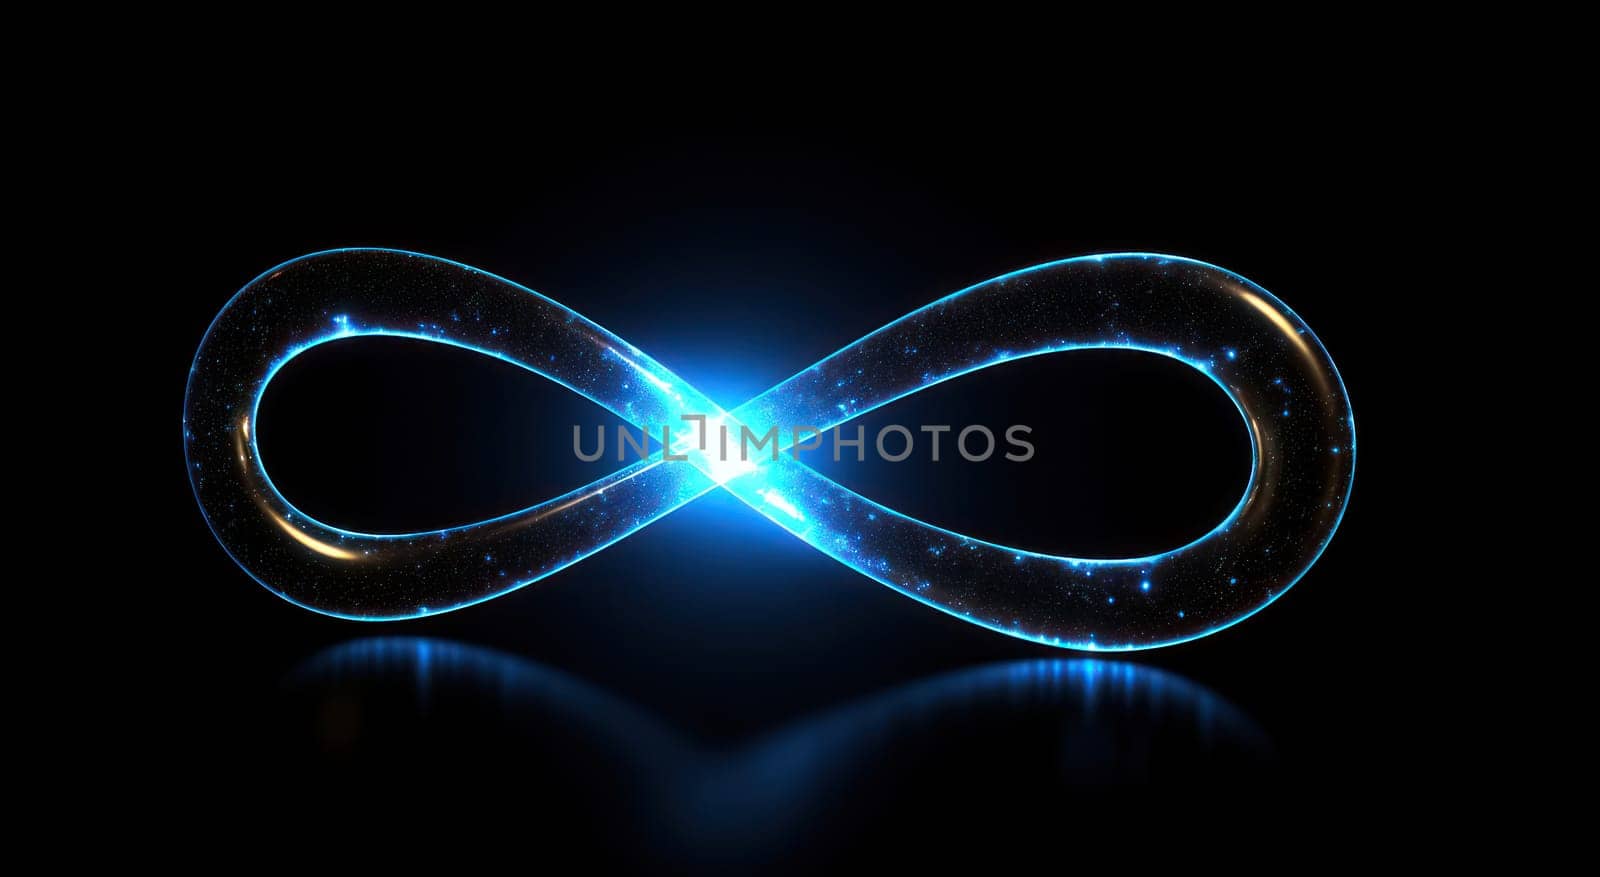 Vibrant Light Trail: A Brilliant Tech Motion in a Colorful Abstract Twinkle Flare, Creating an Endless Flow of Energy on a Shimmering Background